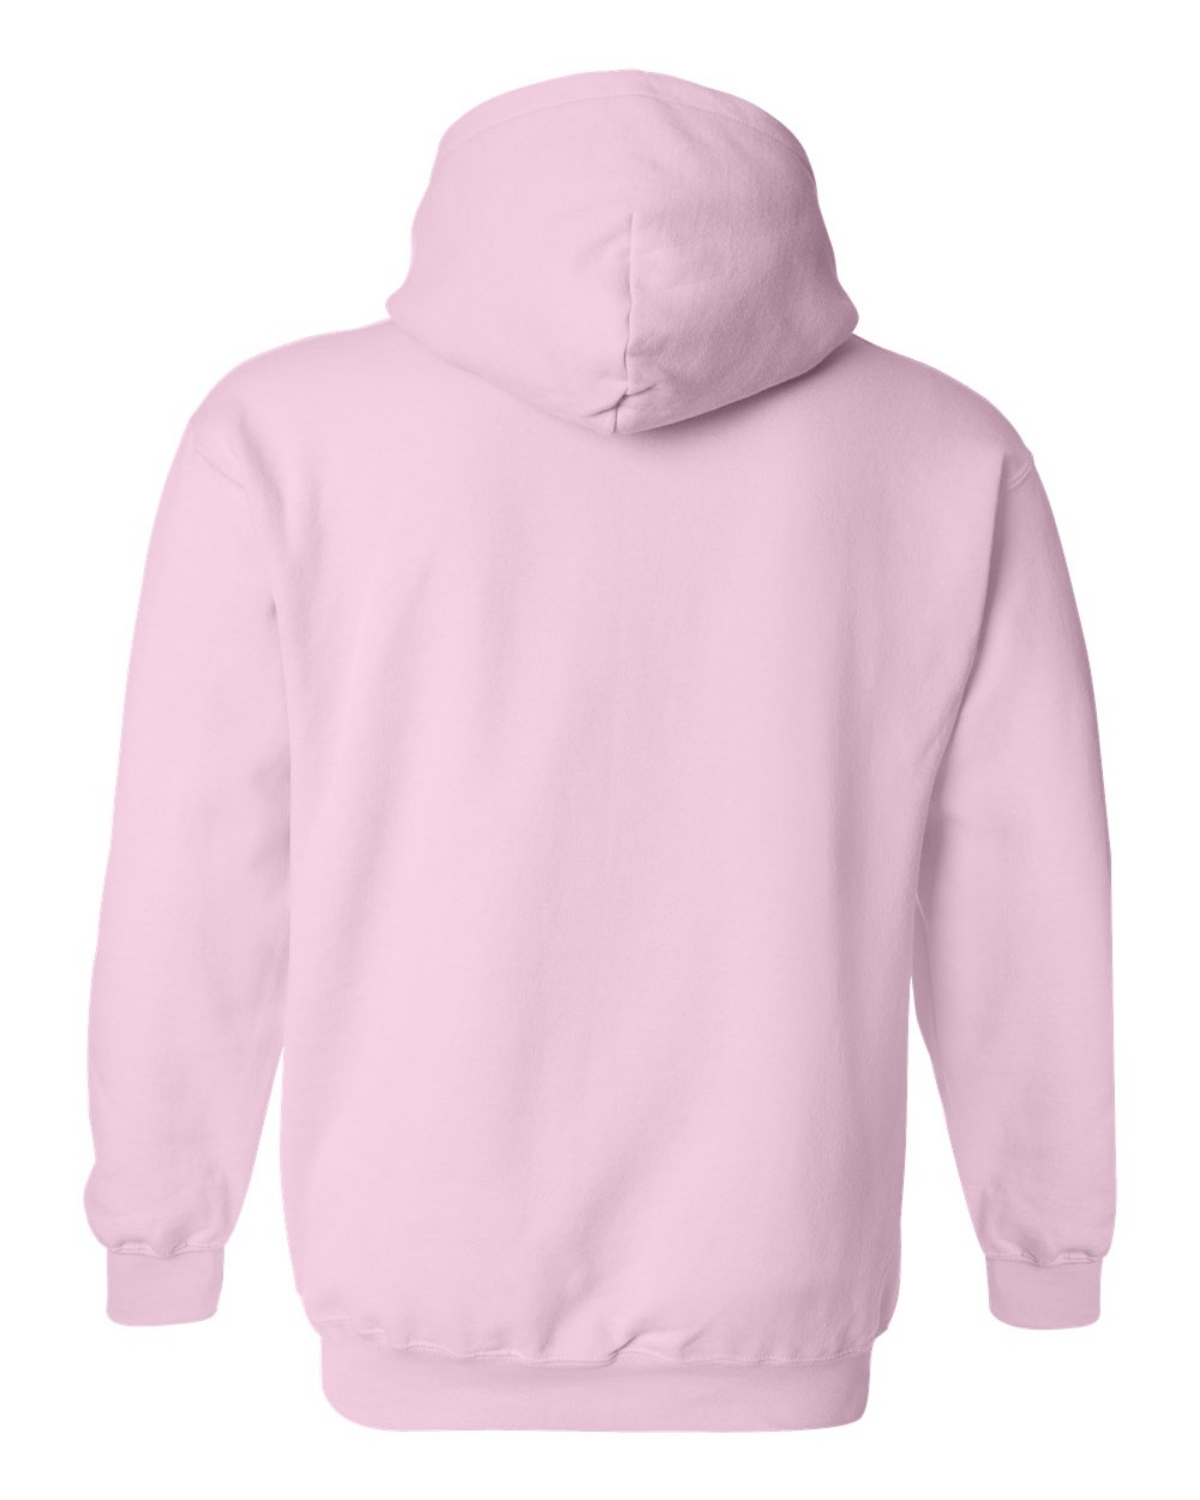 SHOWTIME Queer to Stay Fleece Hooded Sweatshirt - Paramount Shop